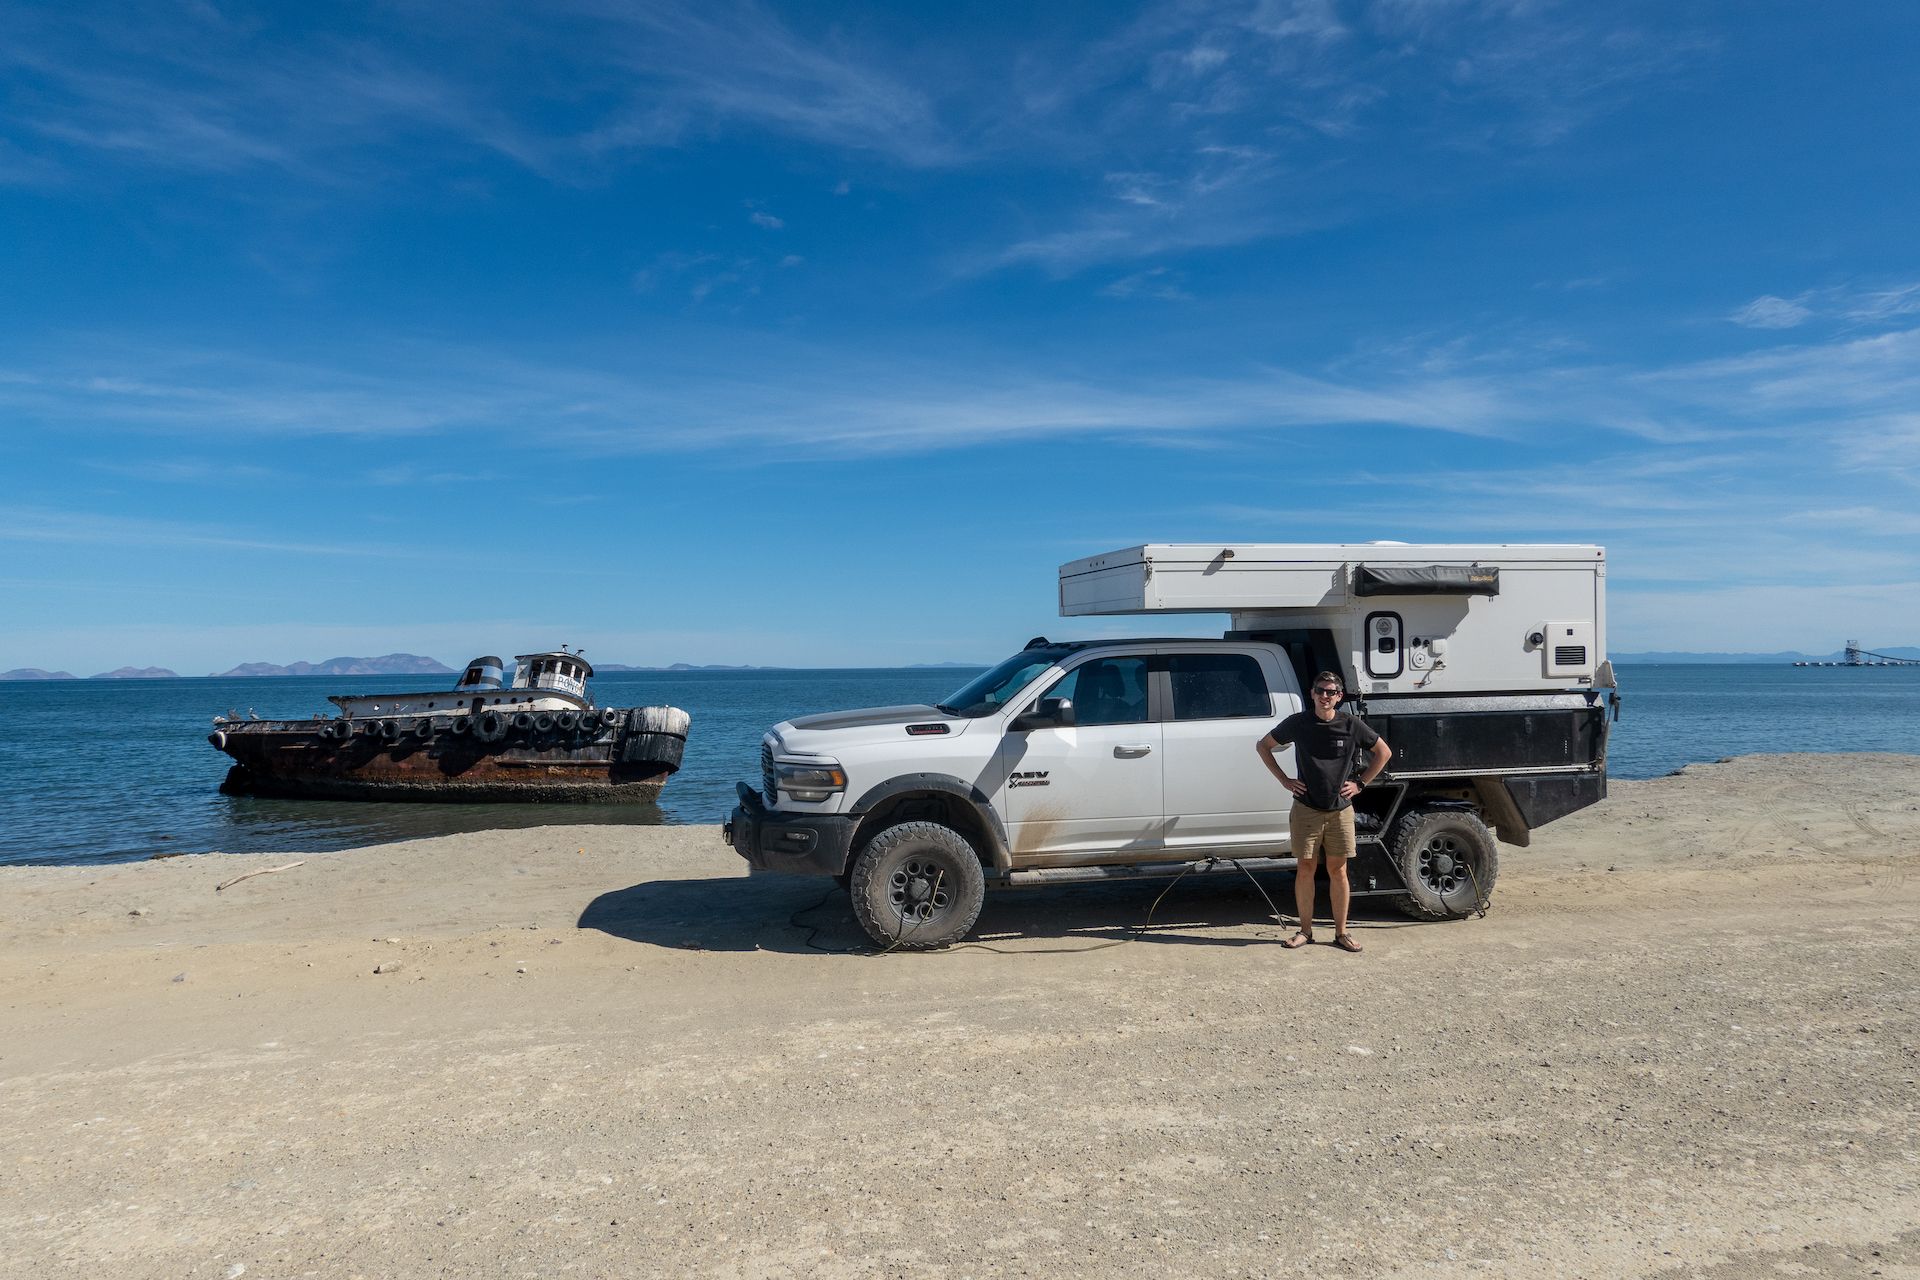 Airing down the tires next to an abandoned boat before starting the 80 kilometers of dirt road to San Evaristo